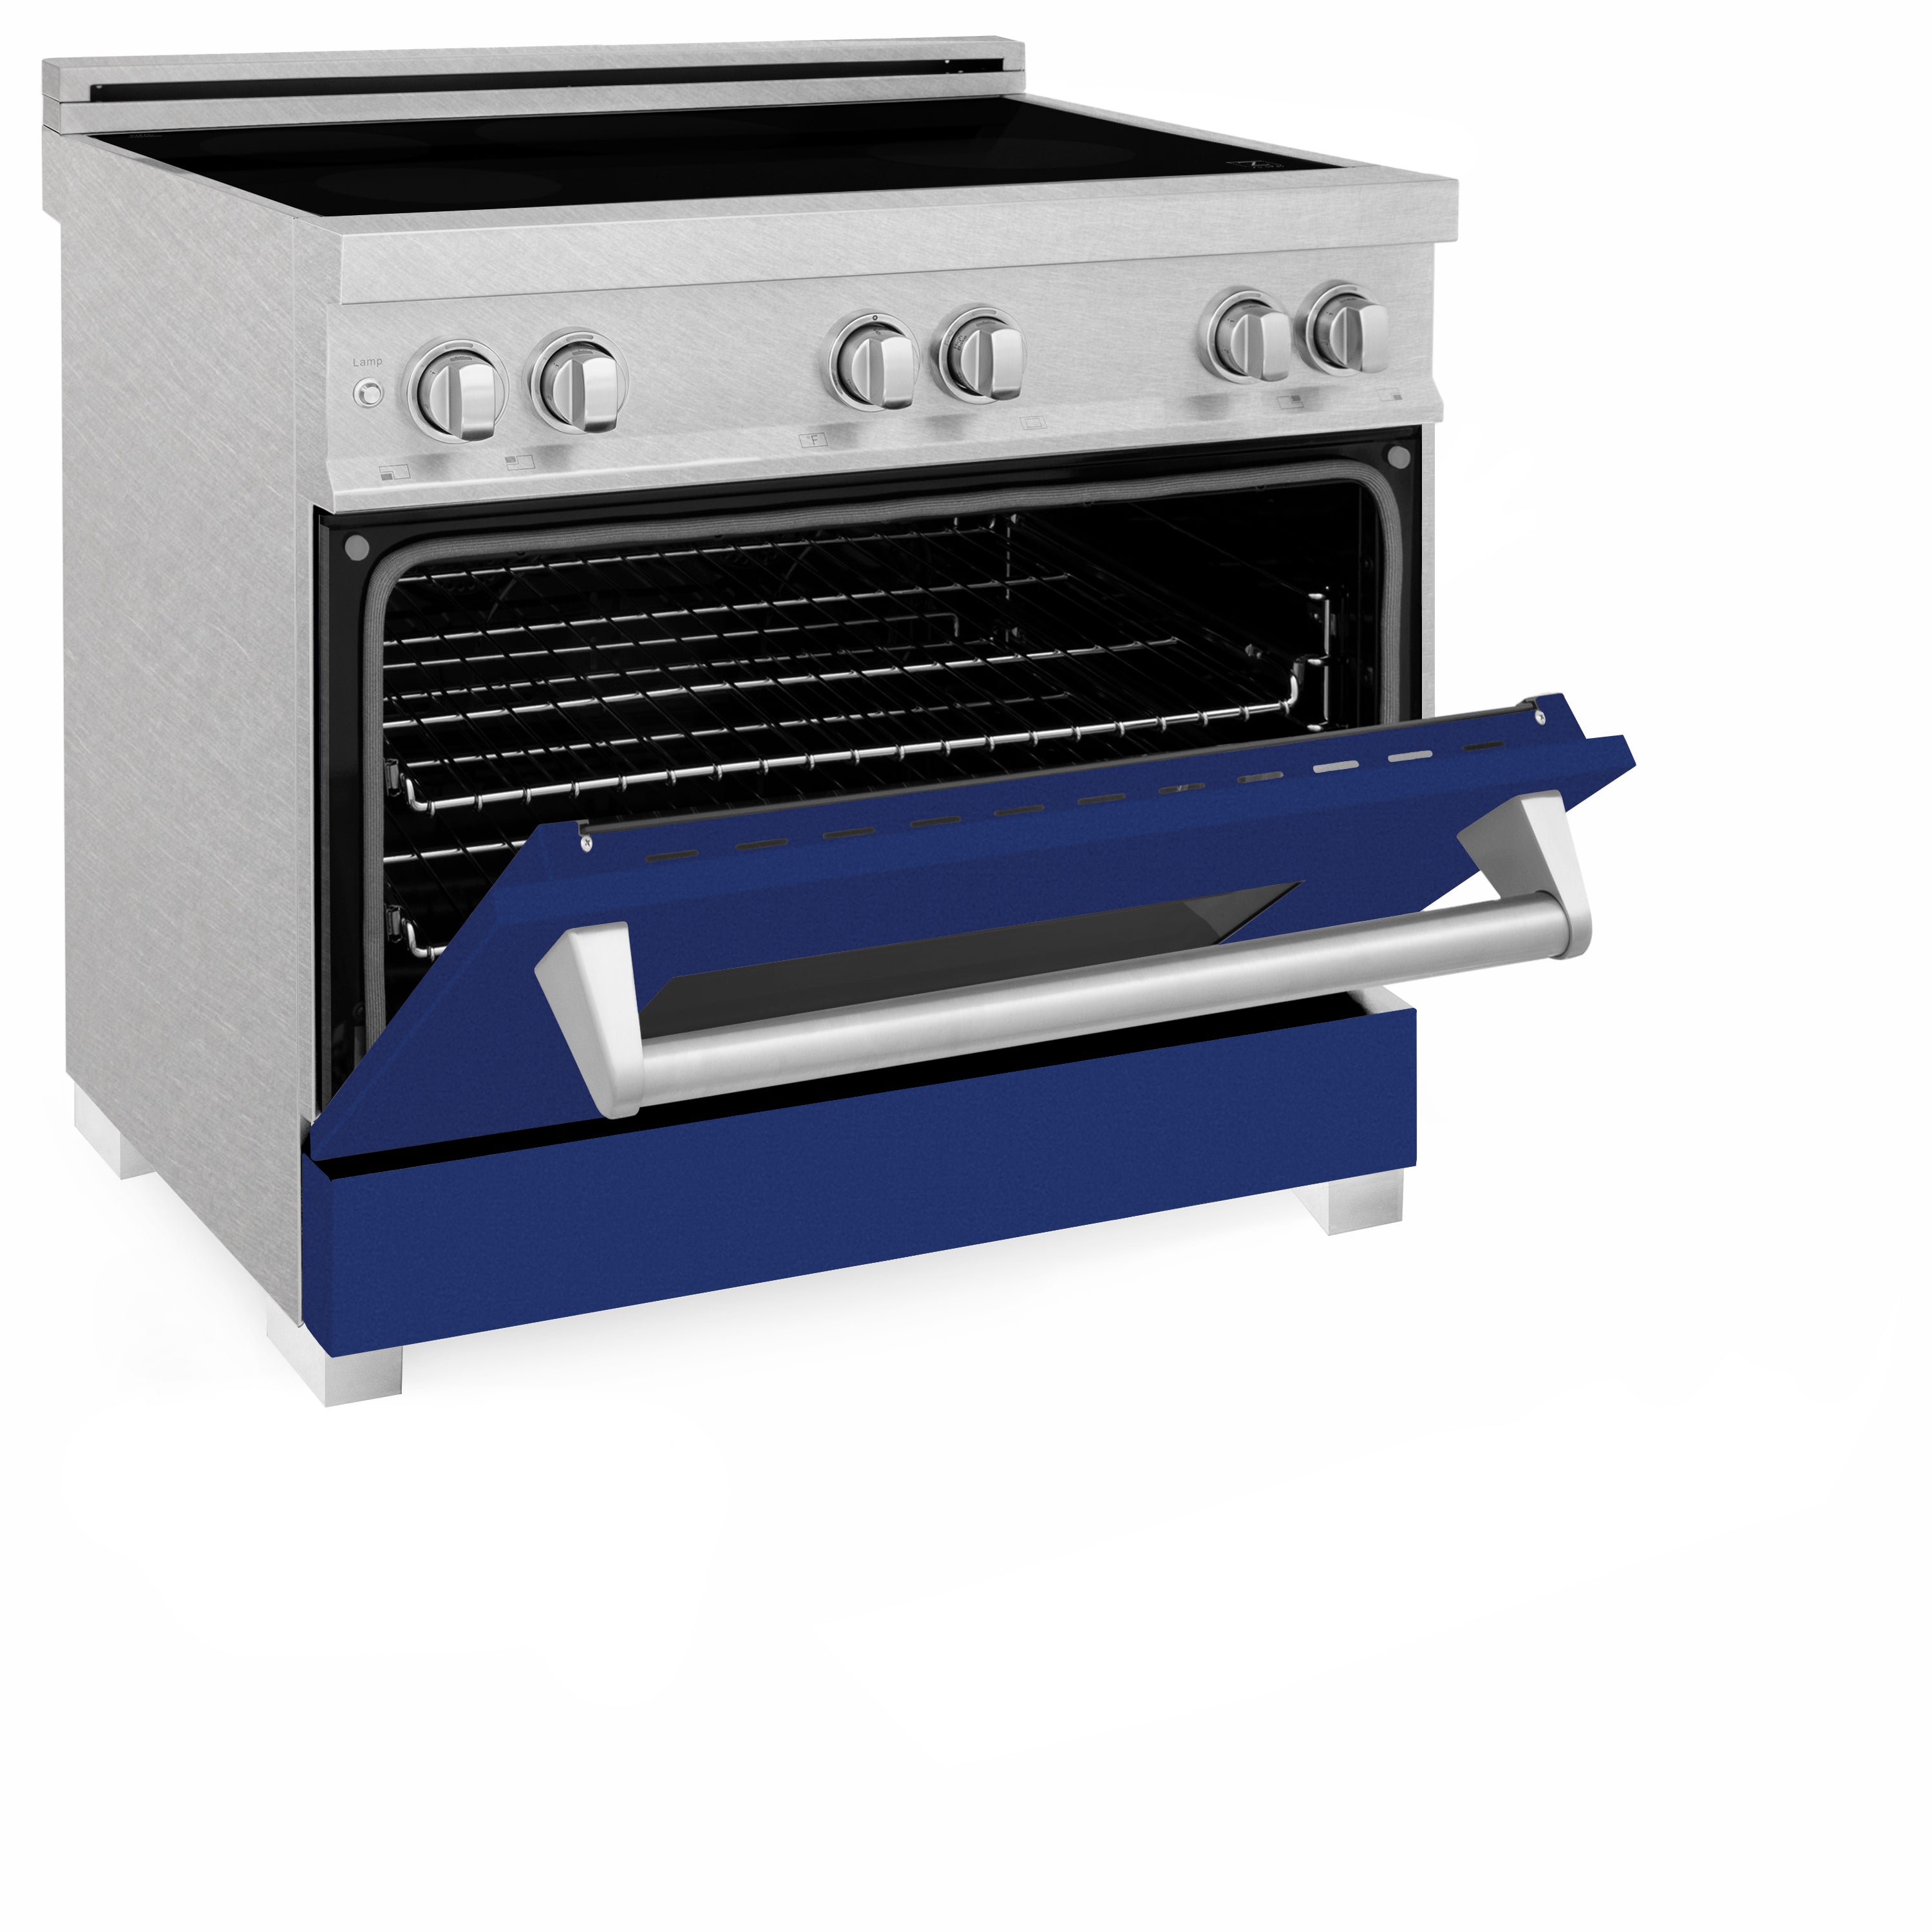 ZLINE 36" 4.6 cu. ft. Induction Range with a 4 Element Stove and Electric Oven in Blue Gloss (RAINDS-BG-36)